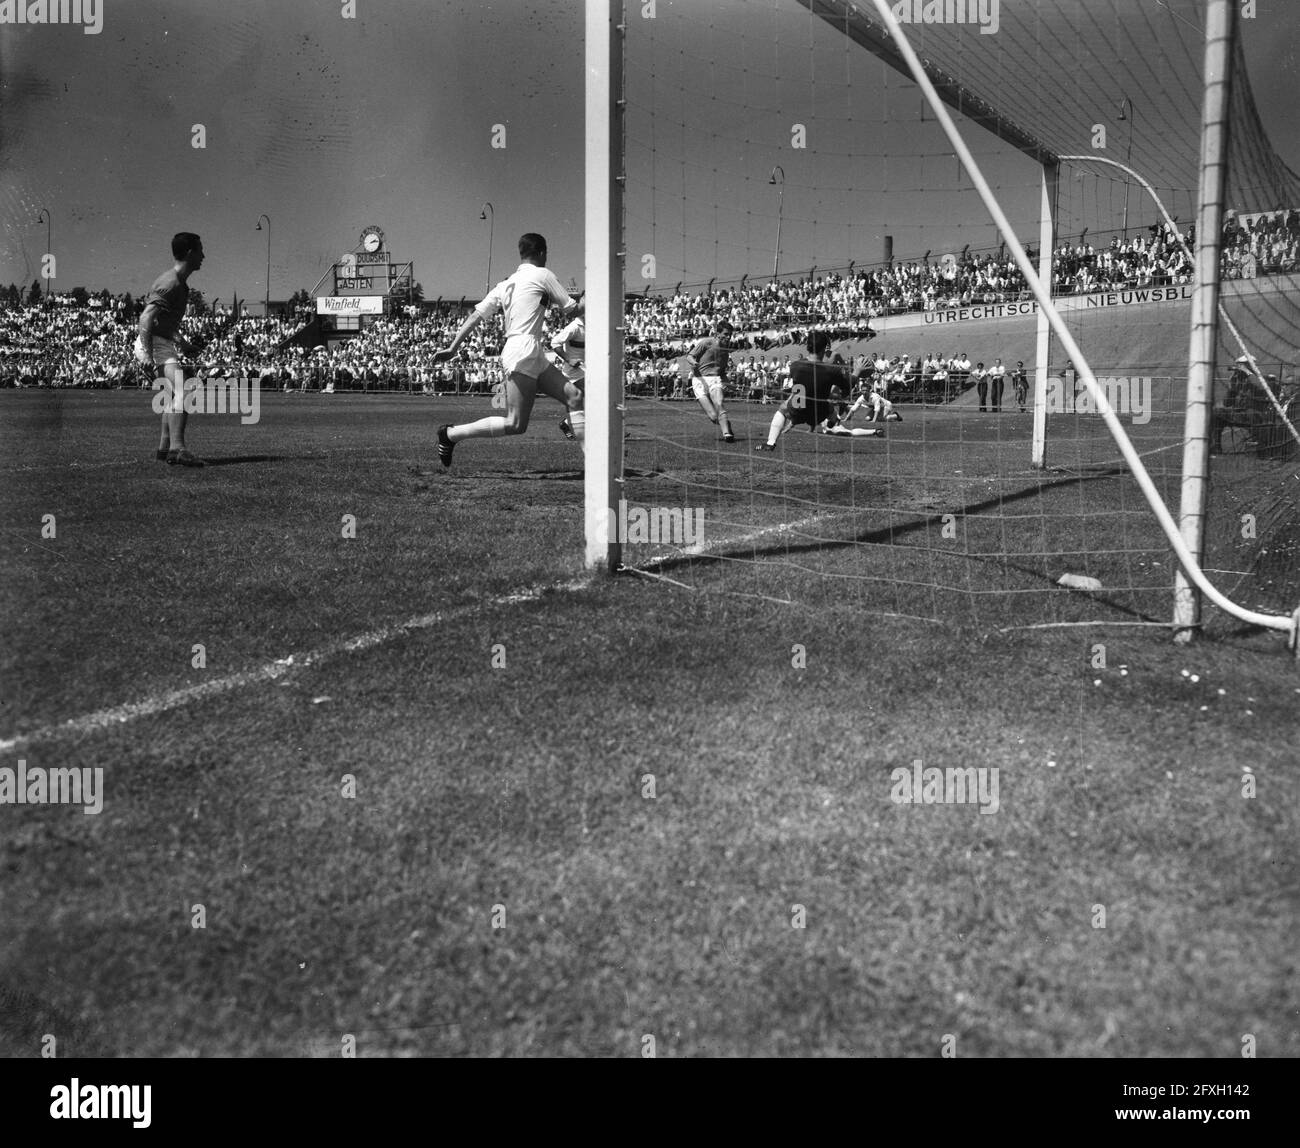 Soccer match DHC against Volewijckers, 25 June 1961, sports, soccer matches, The Netherlands, 20th century press agency photo, news to remember, documentary, historic photography 1945-1990, visual stories, human history of the Twentieth Century, capturing moments in time Stock Photo